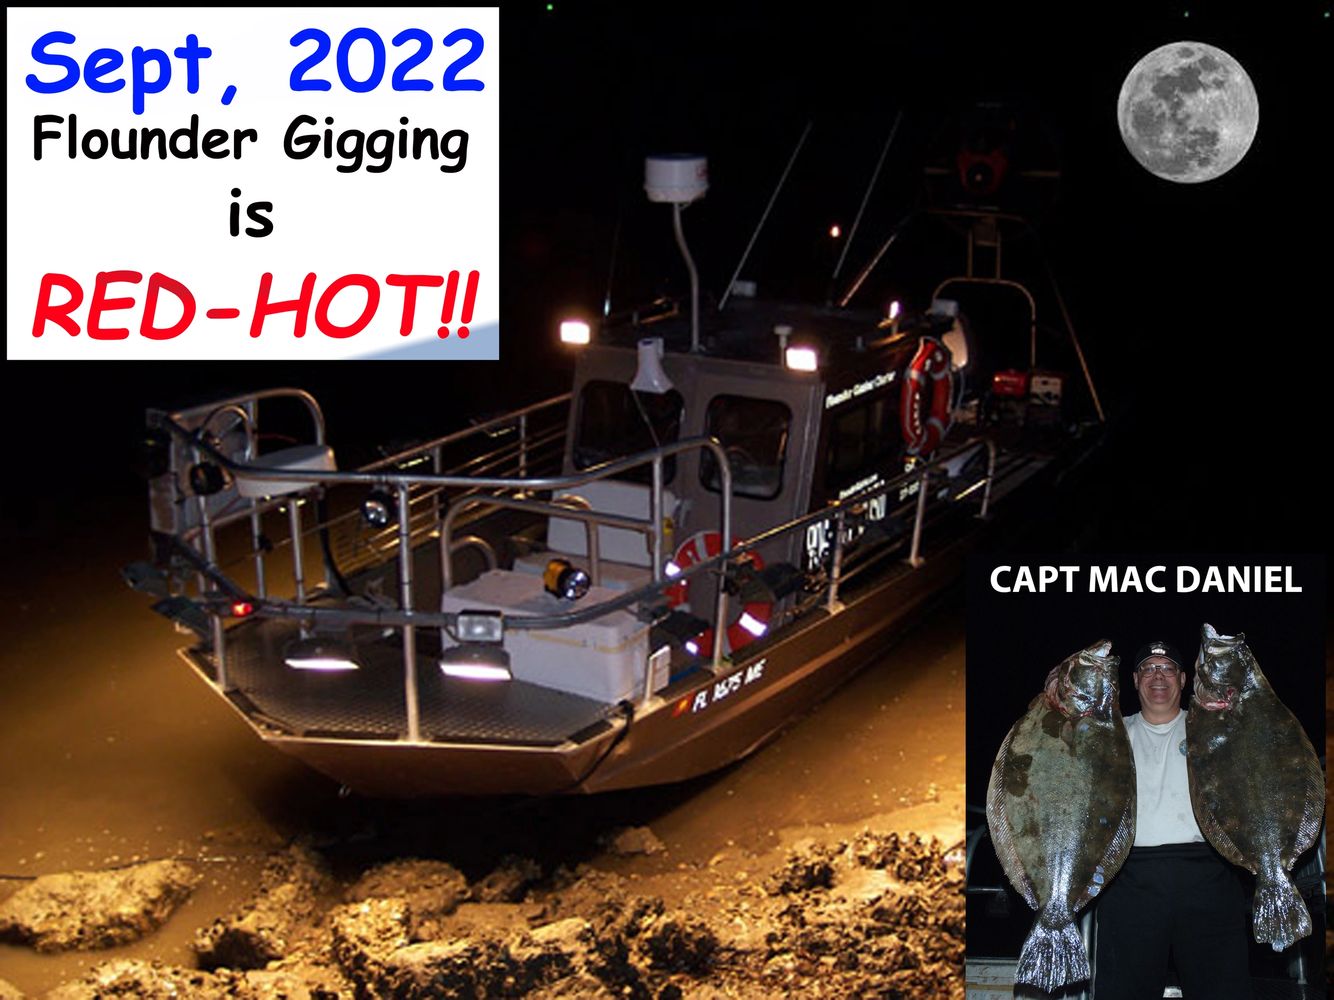 Our boat, the Flounder Barge, by the river's edge, in Sept, 2022